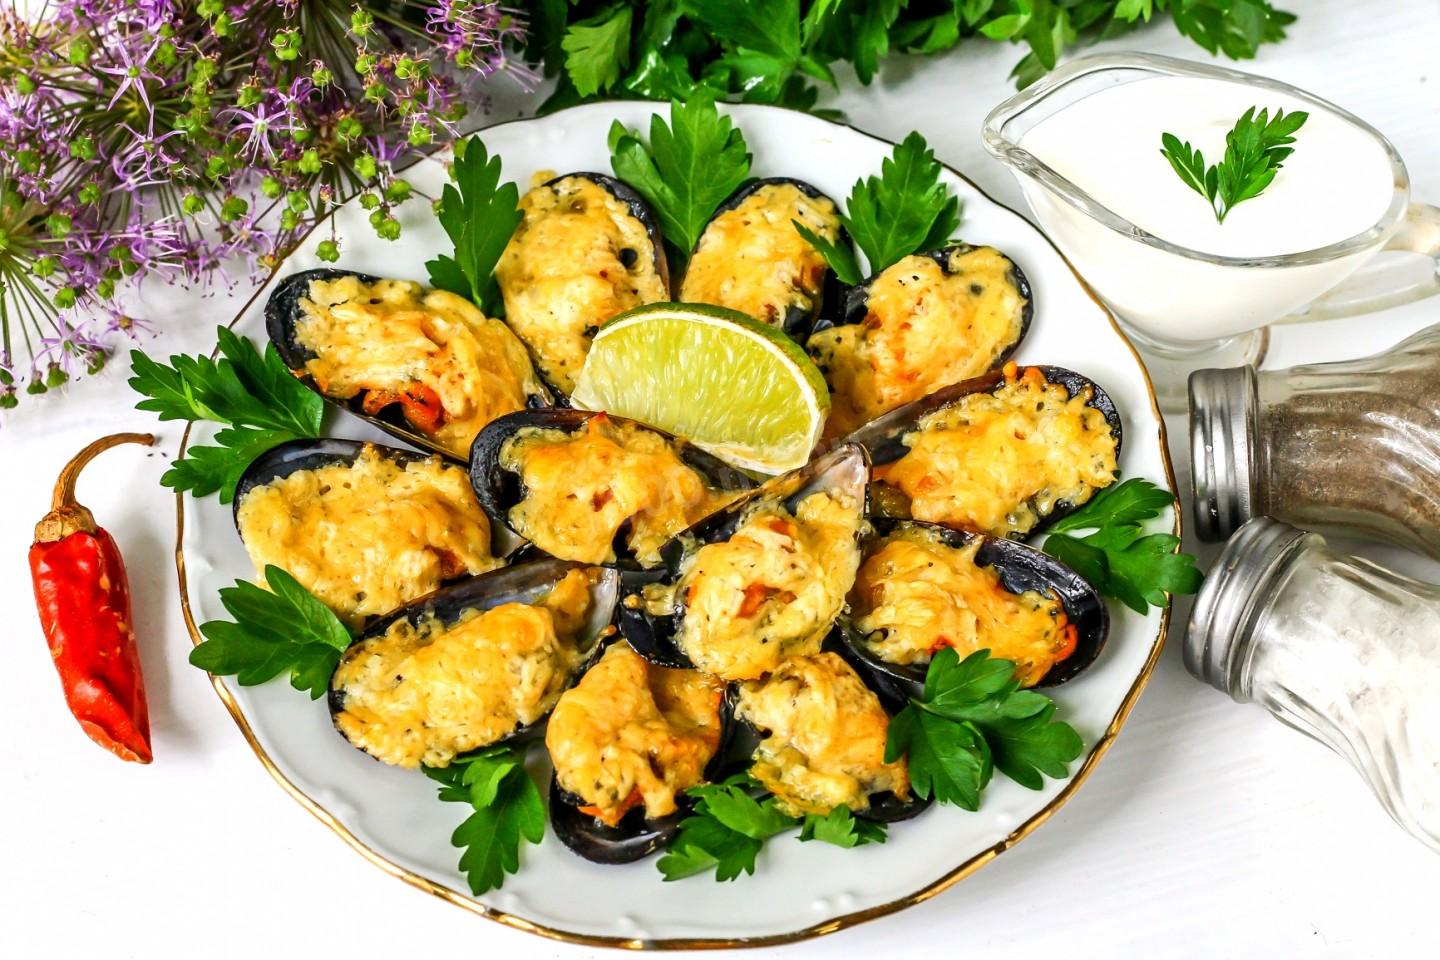 OVEN BAKED MUSSELS WITH CHEESE